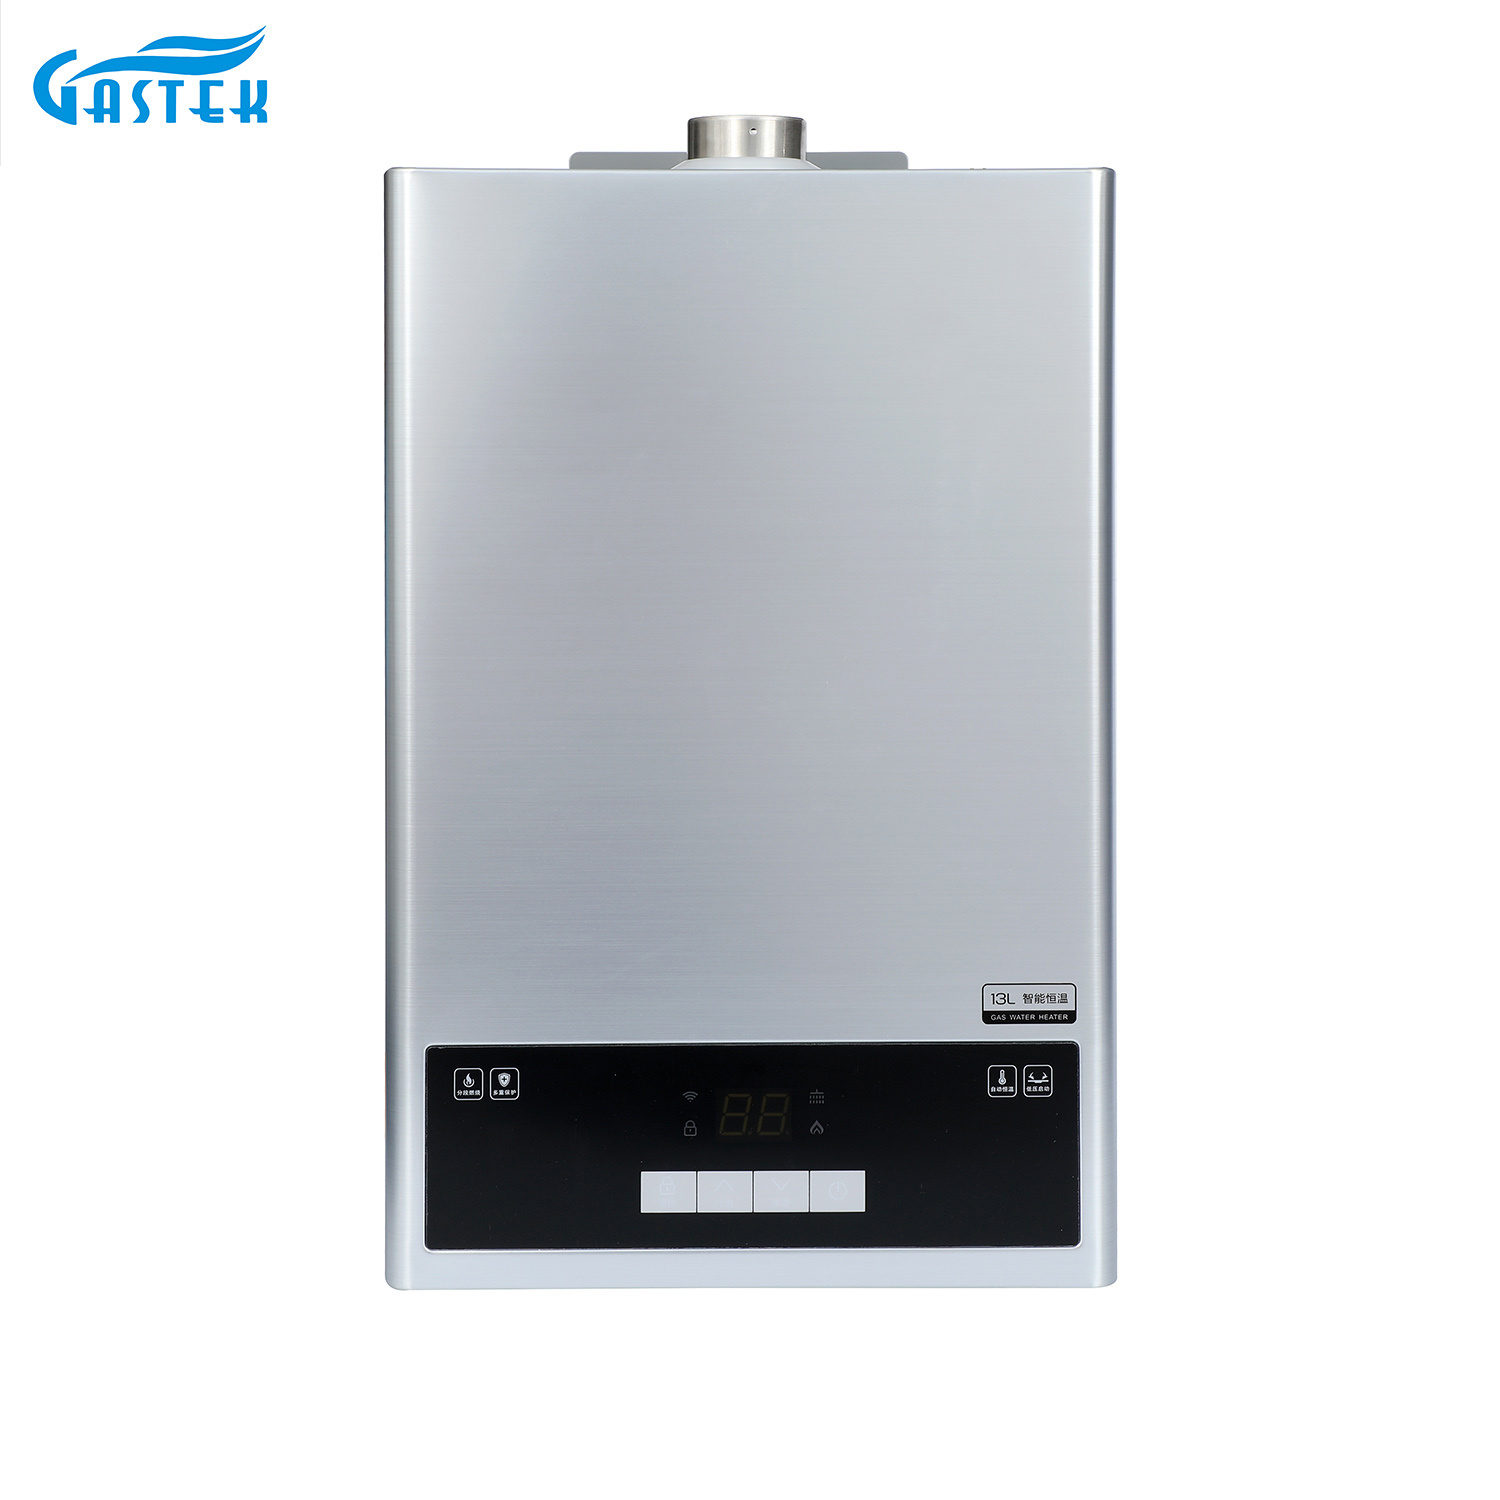 Constant Temperature LCD Panel Display Balanced Type Gas Water Heater with Turbo